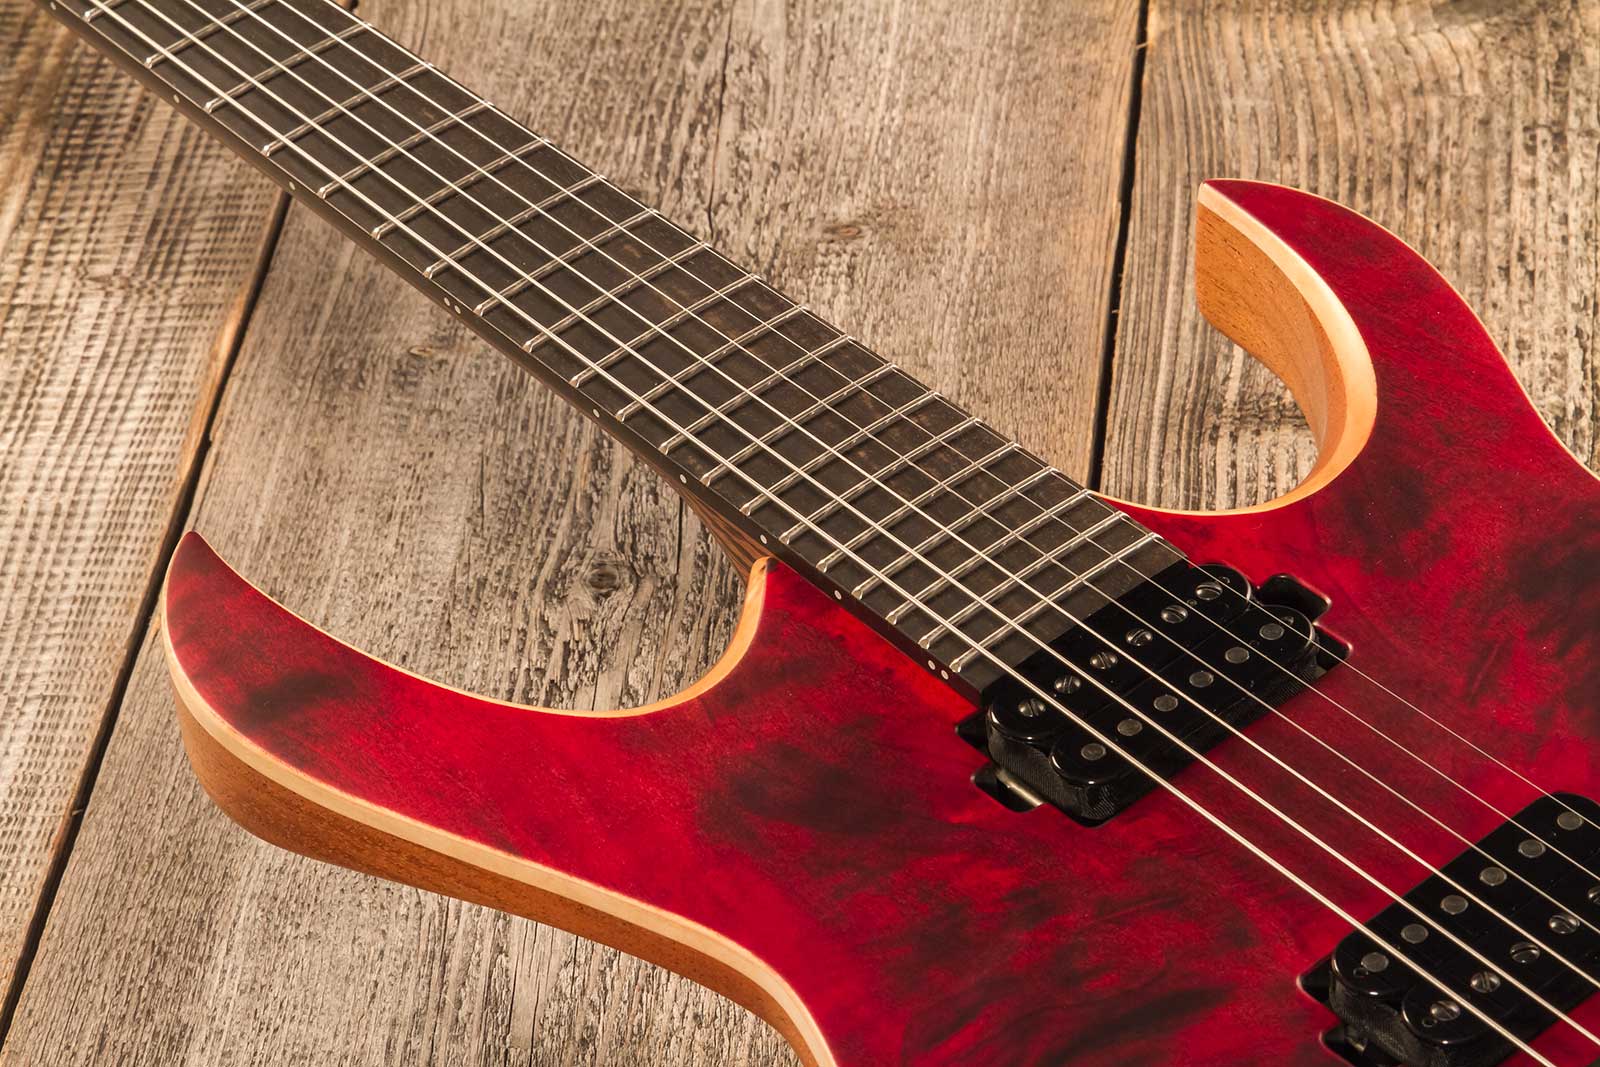 Mayones Guitars Duvell Elite 6 2h Bare Knuckle Ht Eb #df2301294 - Trans Dirty Red Satine - Metal electric guitar - Variation 4